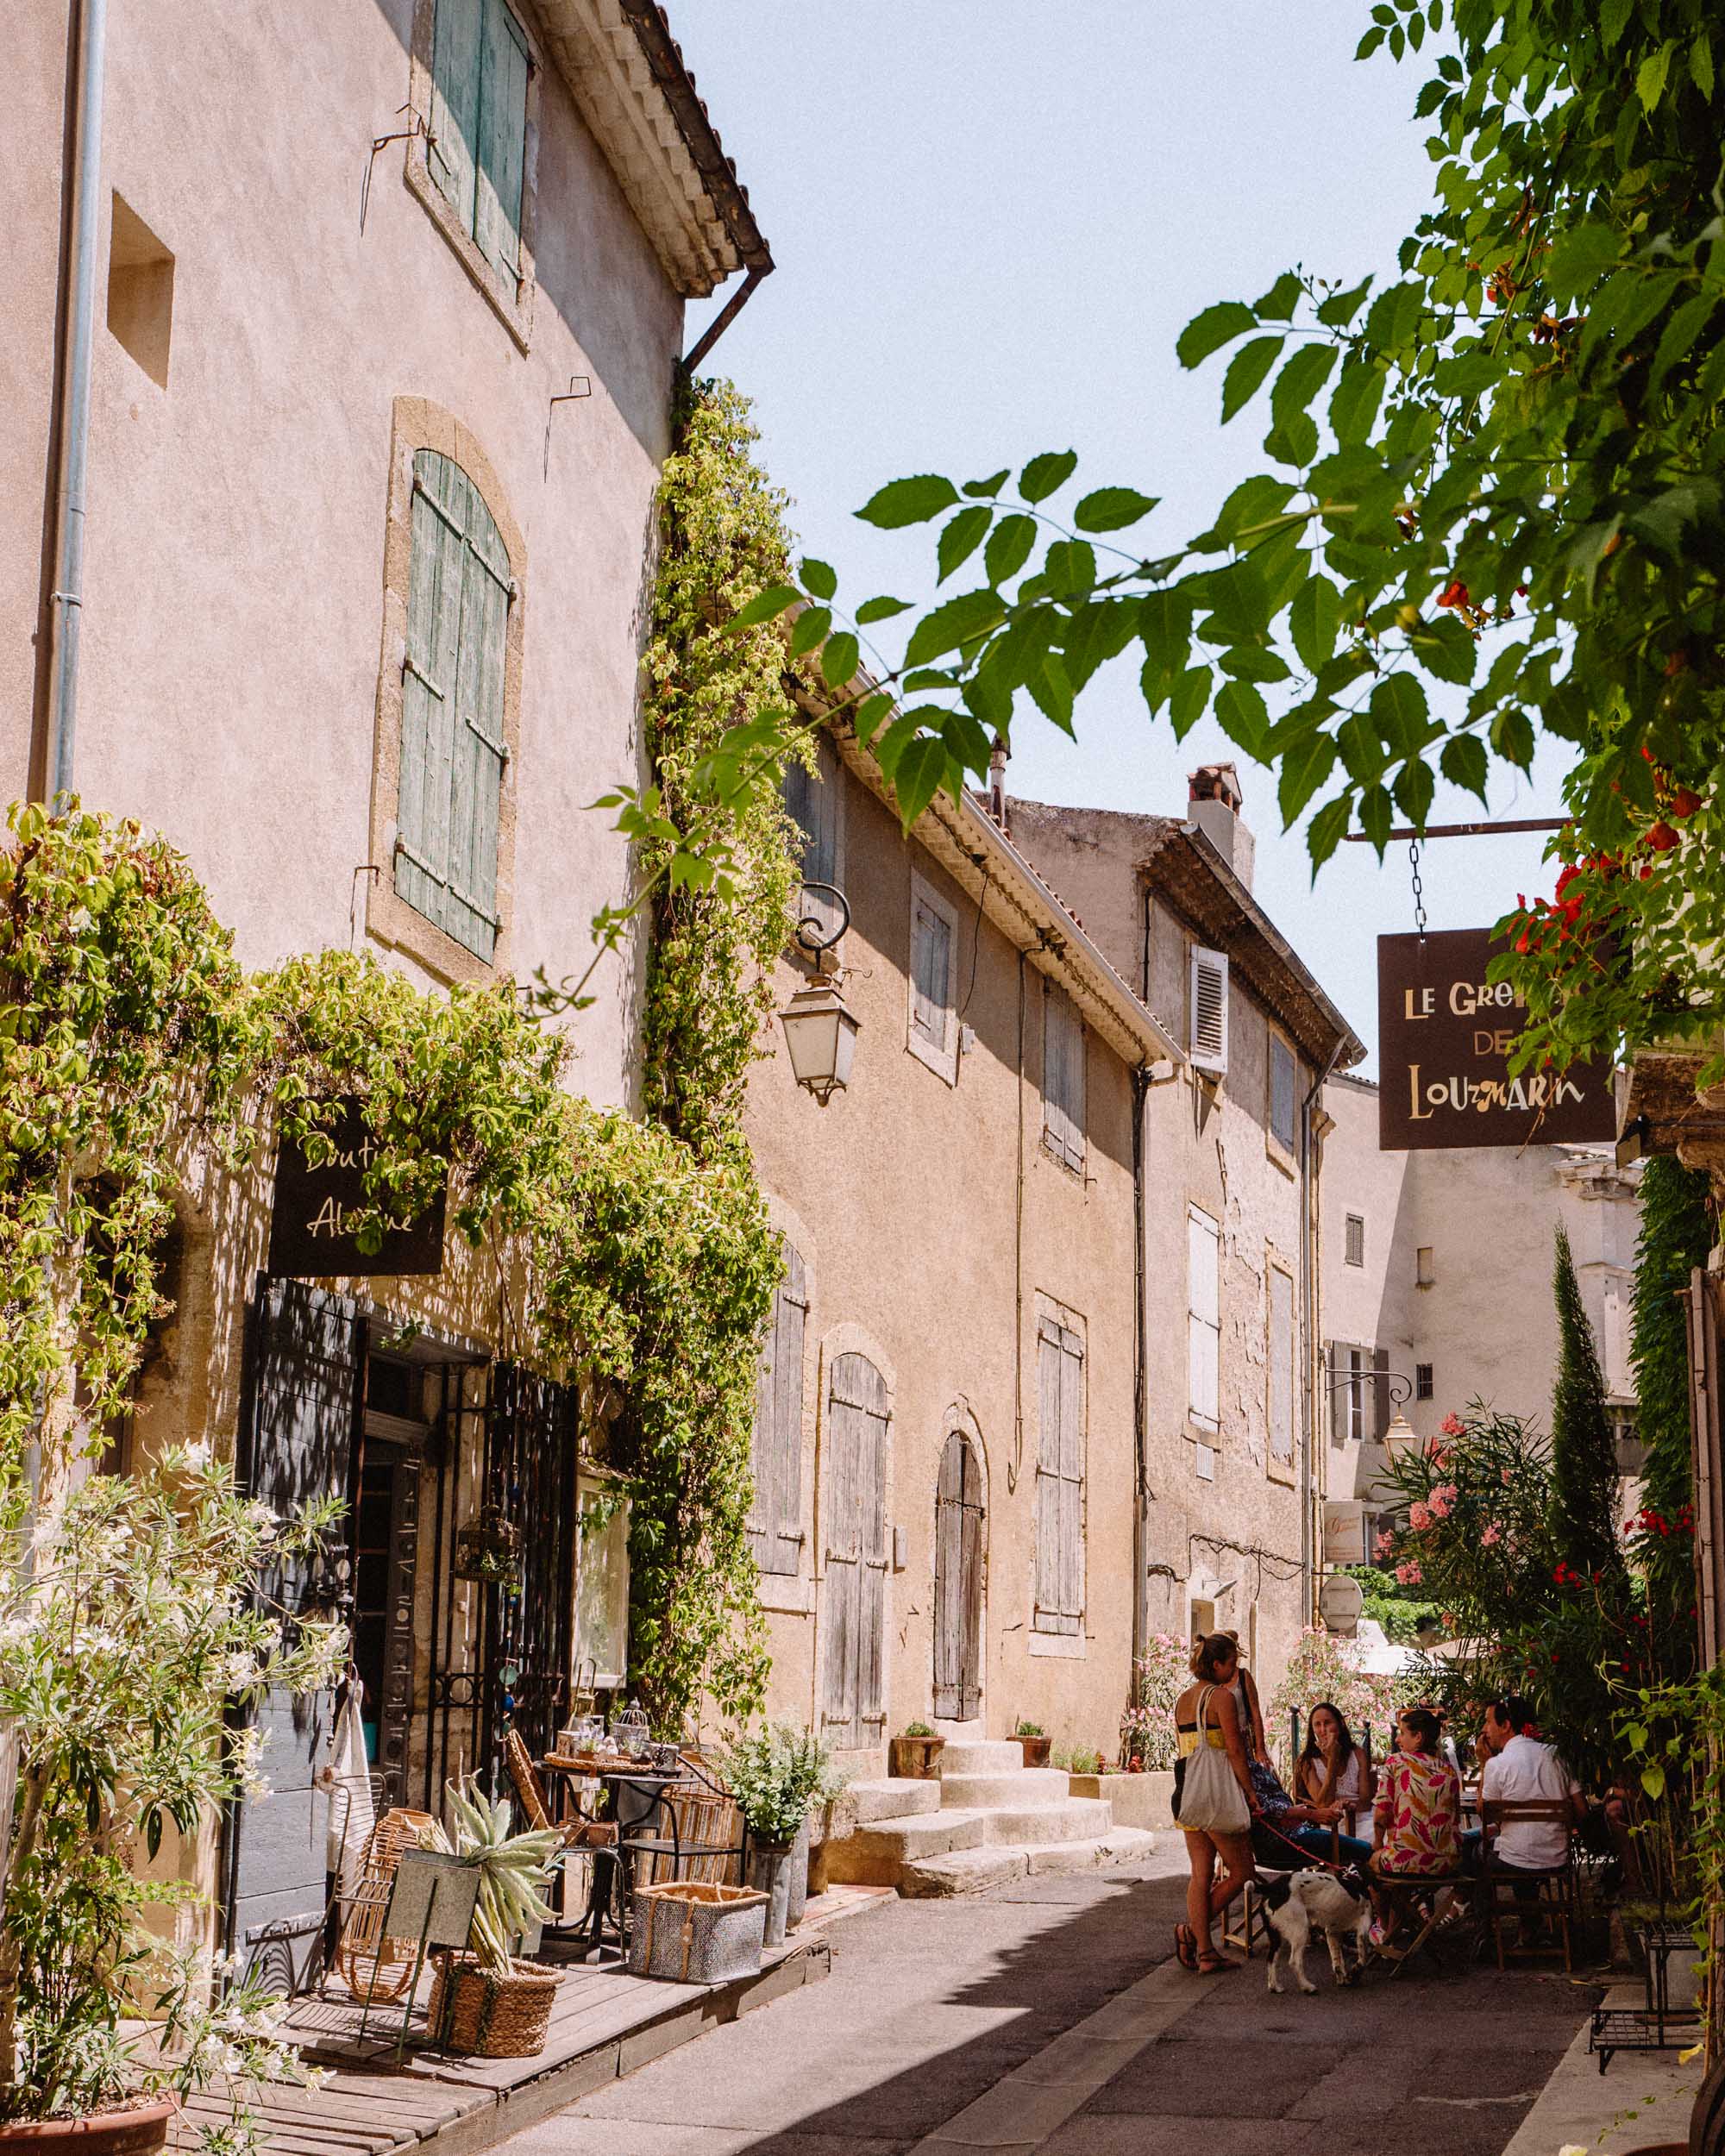 Lourmarin town in Provence France